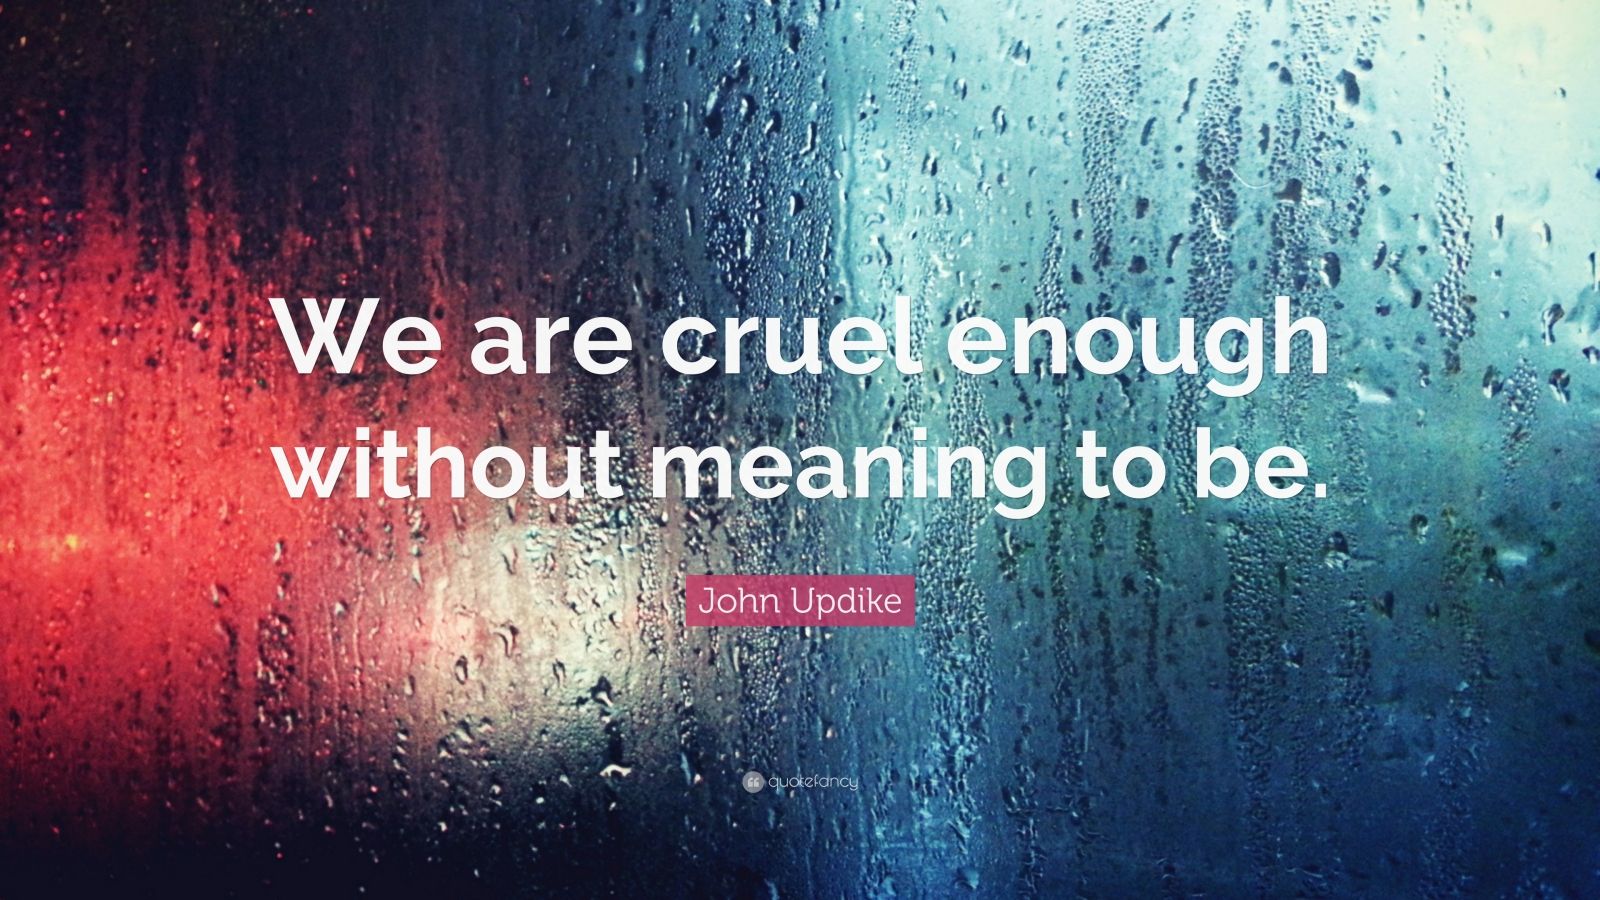 John Updike Quote “we Are Cruel Enough Without Meaning To Be” 6 Wallpapers Quotefancy 6459